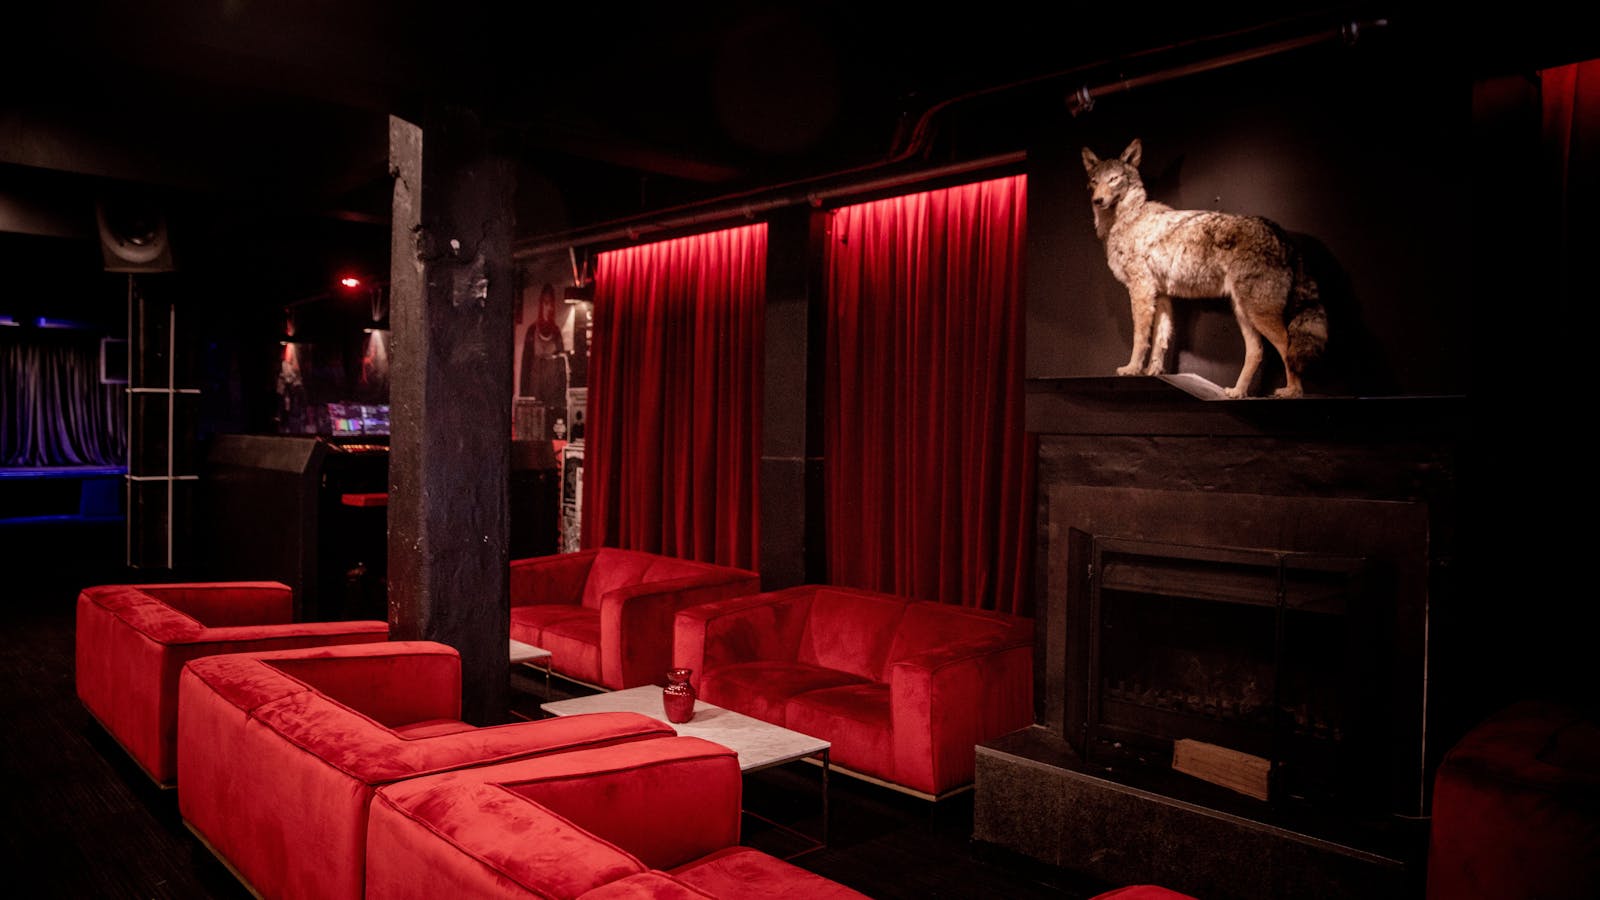 Altar's taxidermy coyote mascot stands above the open fire in the lounge bar